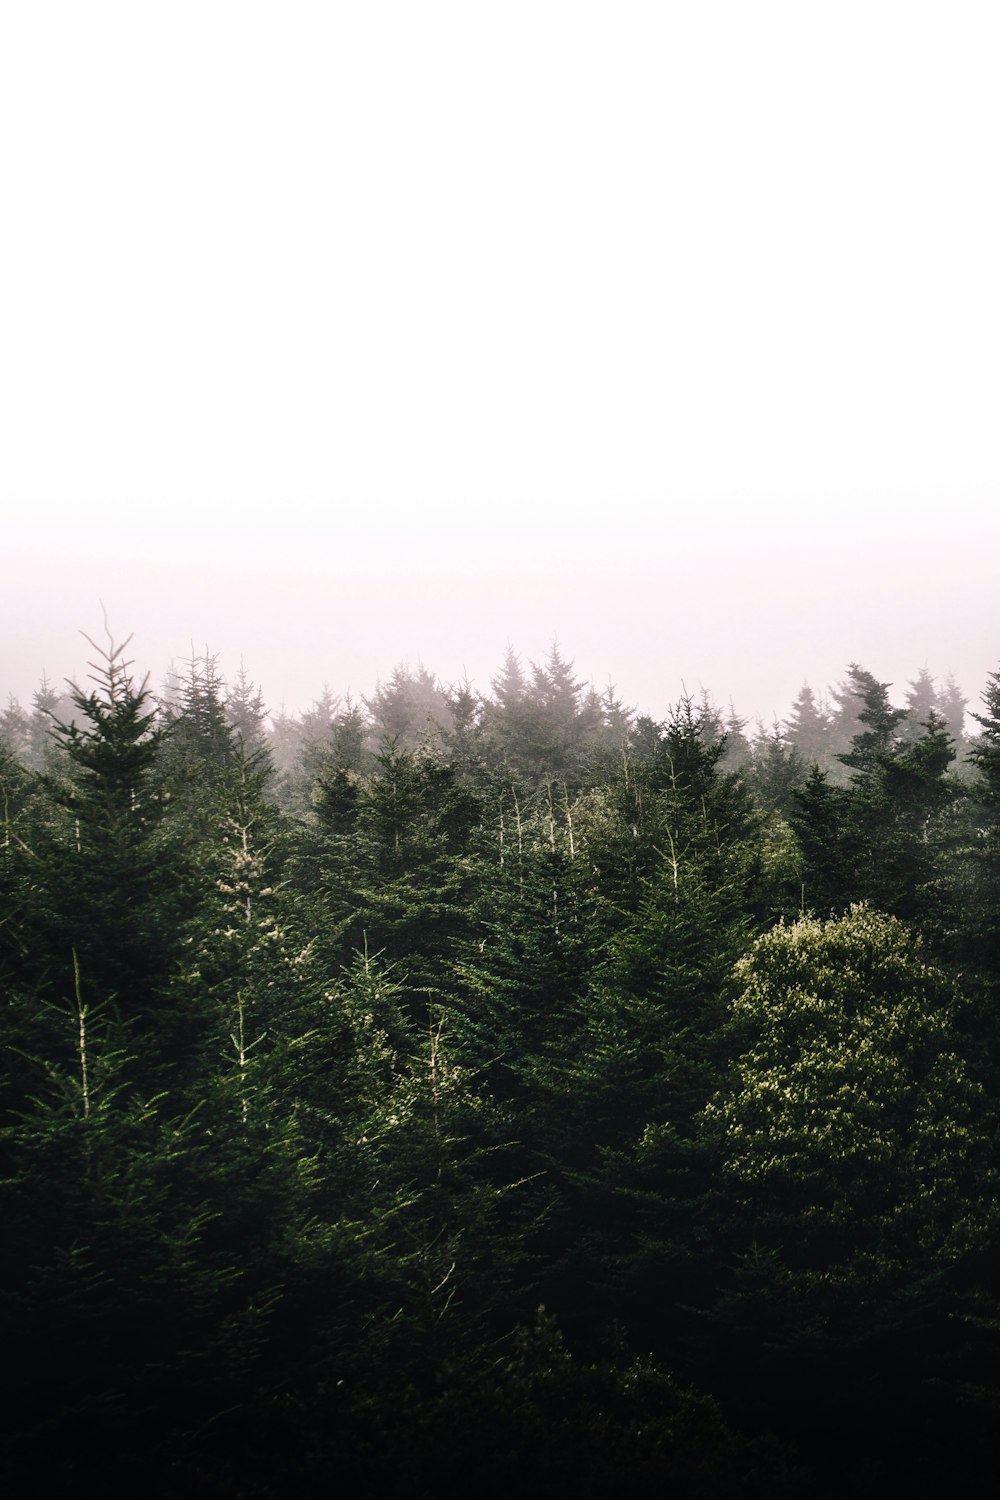 view of trees during foggy weather